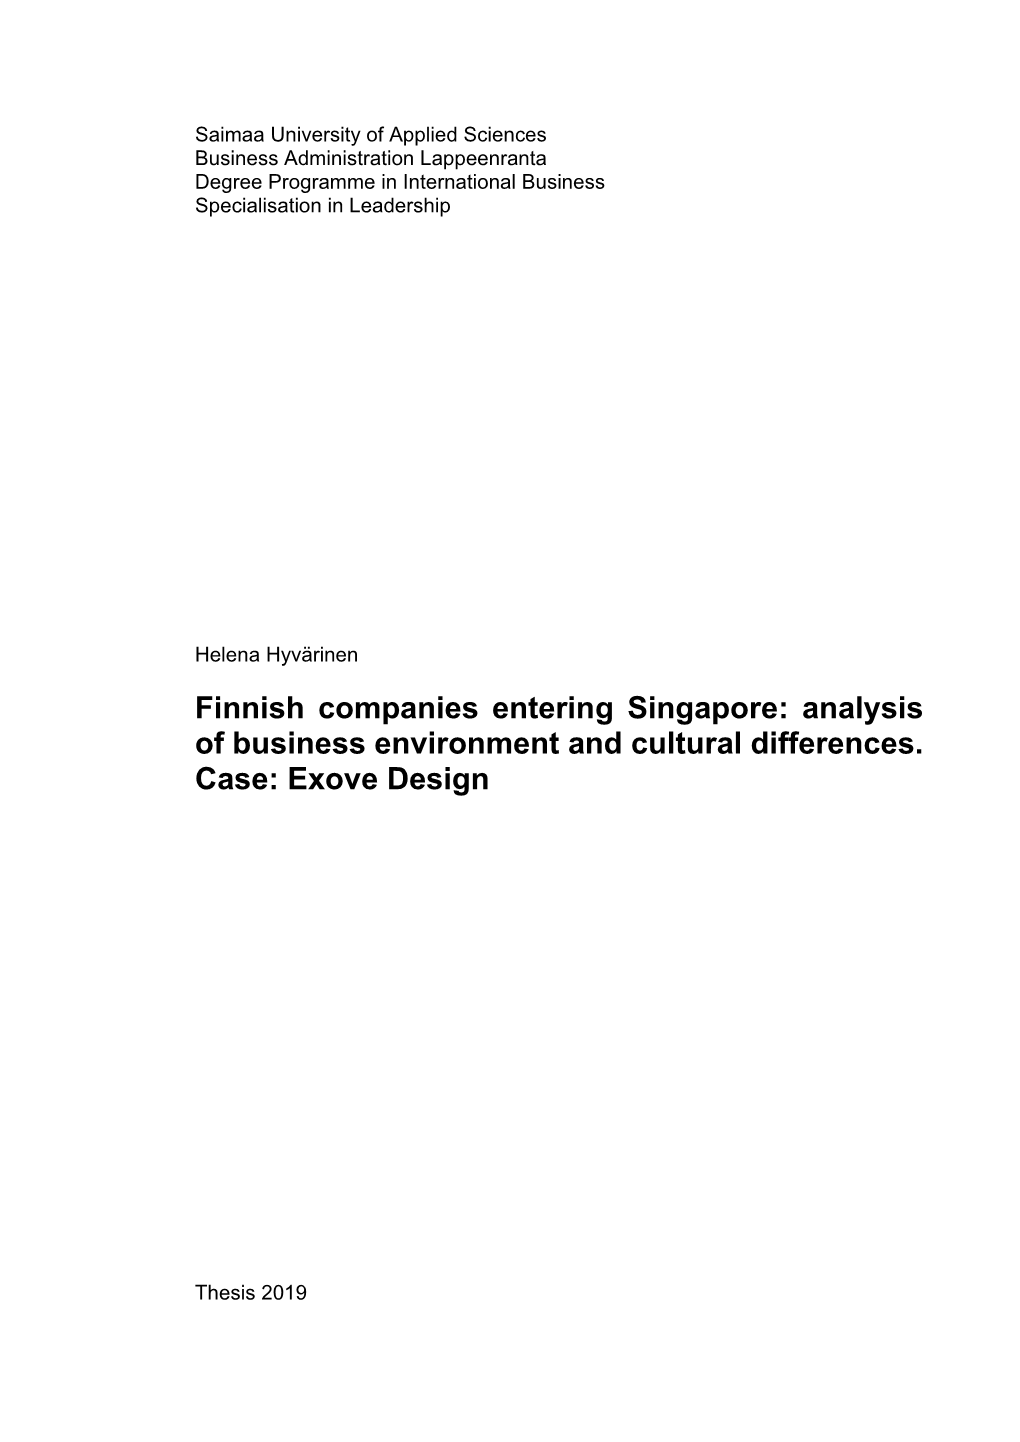 Finnish Companies Entering Singapore: Analysis of Business Environment and Cultural Differences